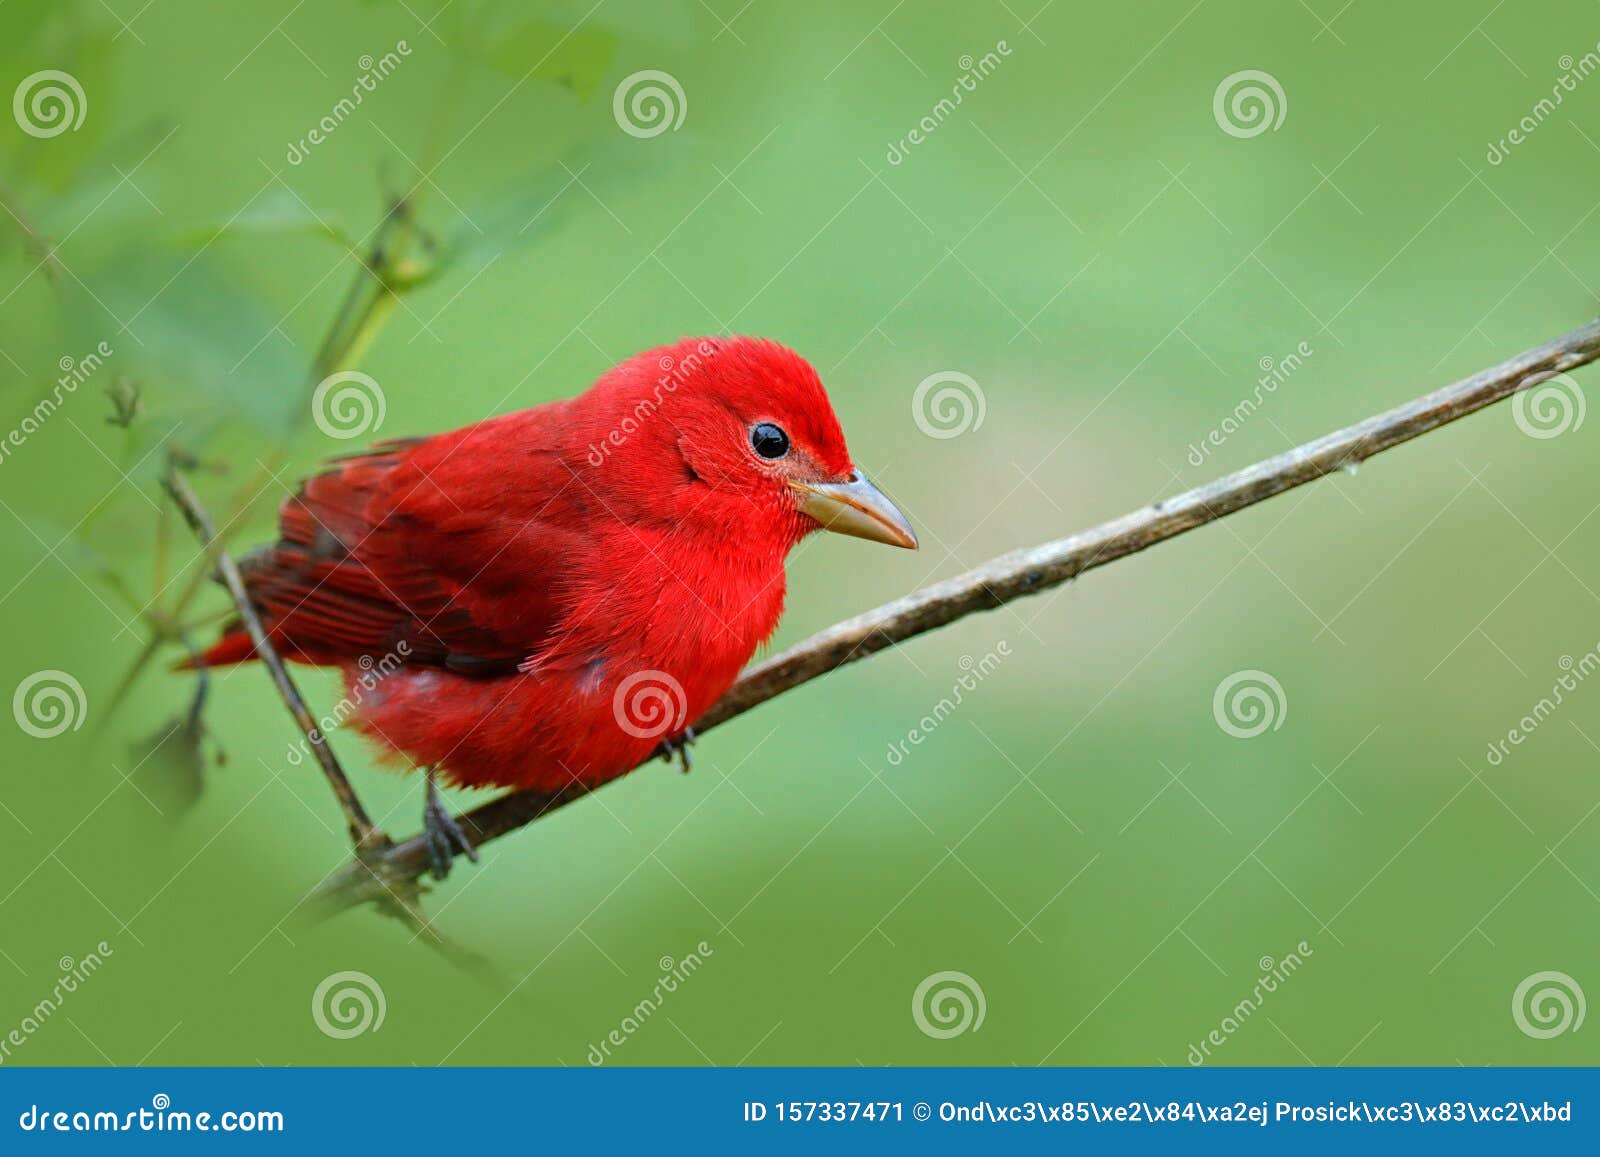 red summer tanager, piranga rubra, red bird in the nature habitat. tanager sitting on the green tree. birdwatching in costa rica.